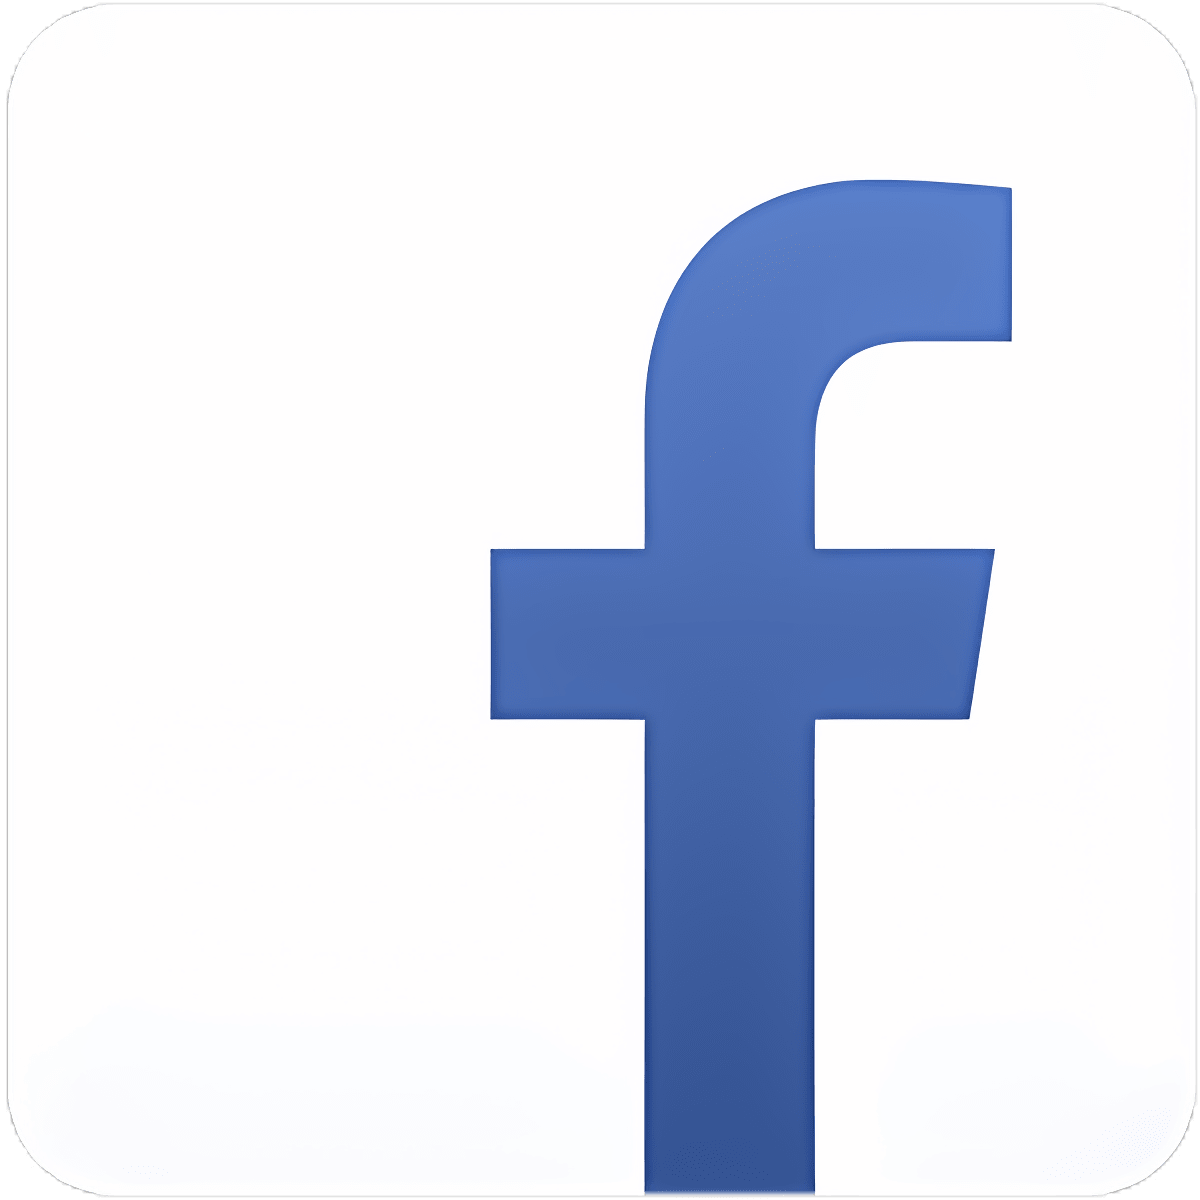 Facebook Lite Apk For Android Download